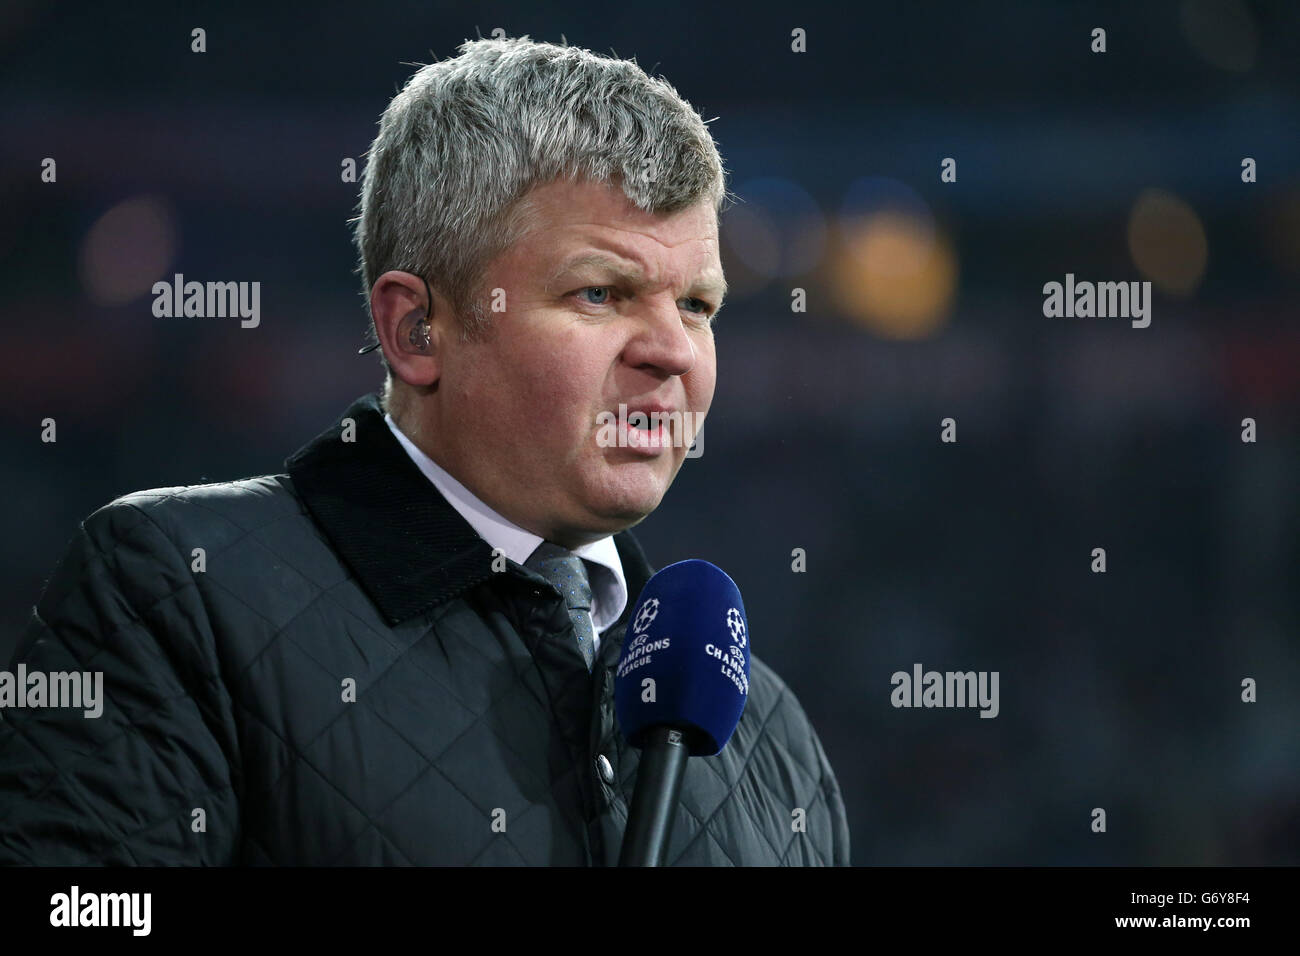 Soccer - UEFA Champions League - Round of 16 - Second Leg - Bayern Munich v Arsenal - Allianz Arena. ITV Sport presenter Adrian Chiles before the game Stock Photo